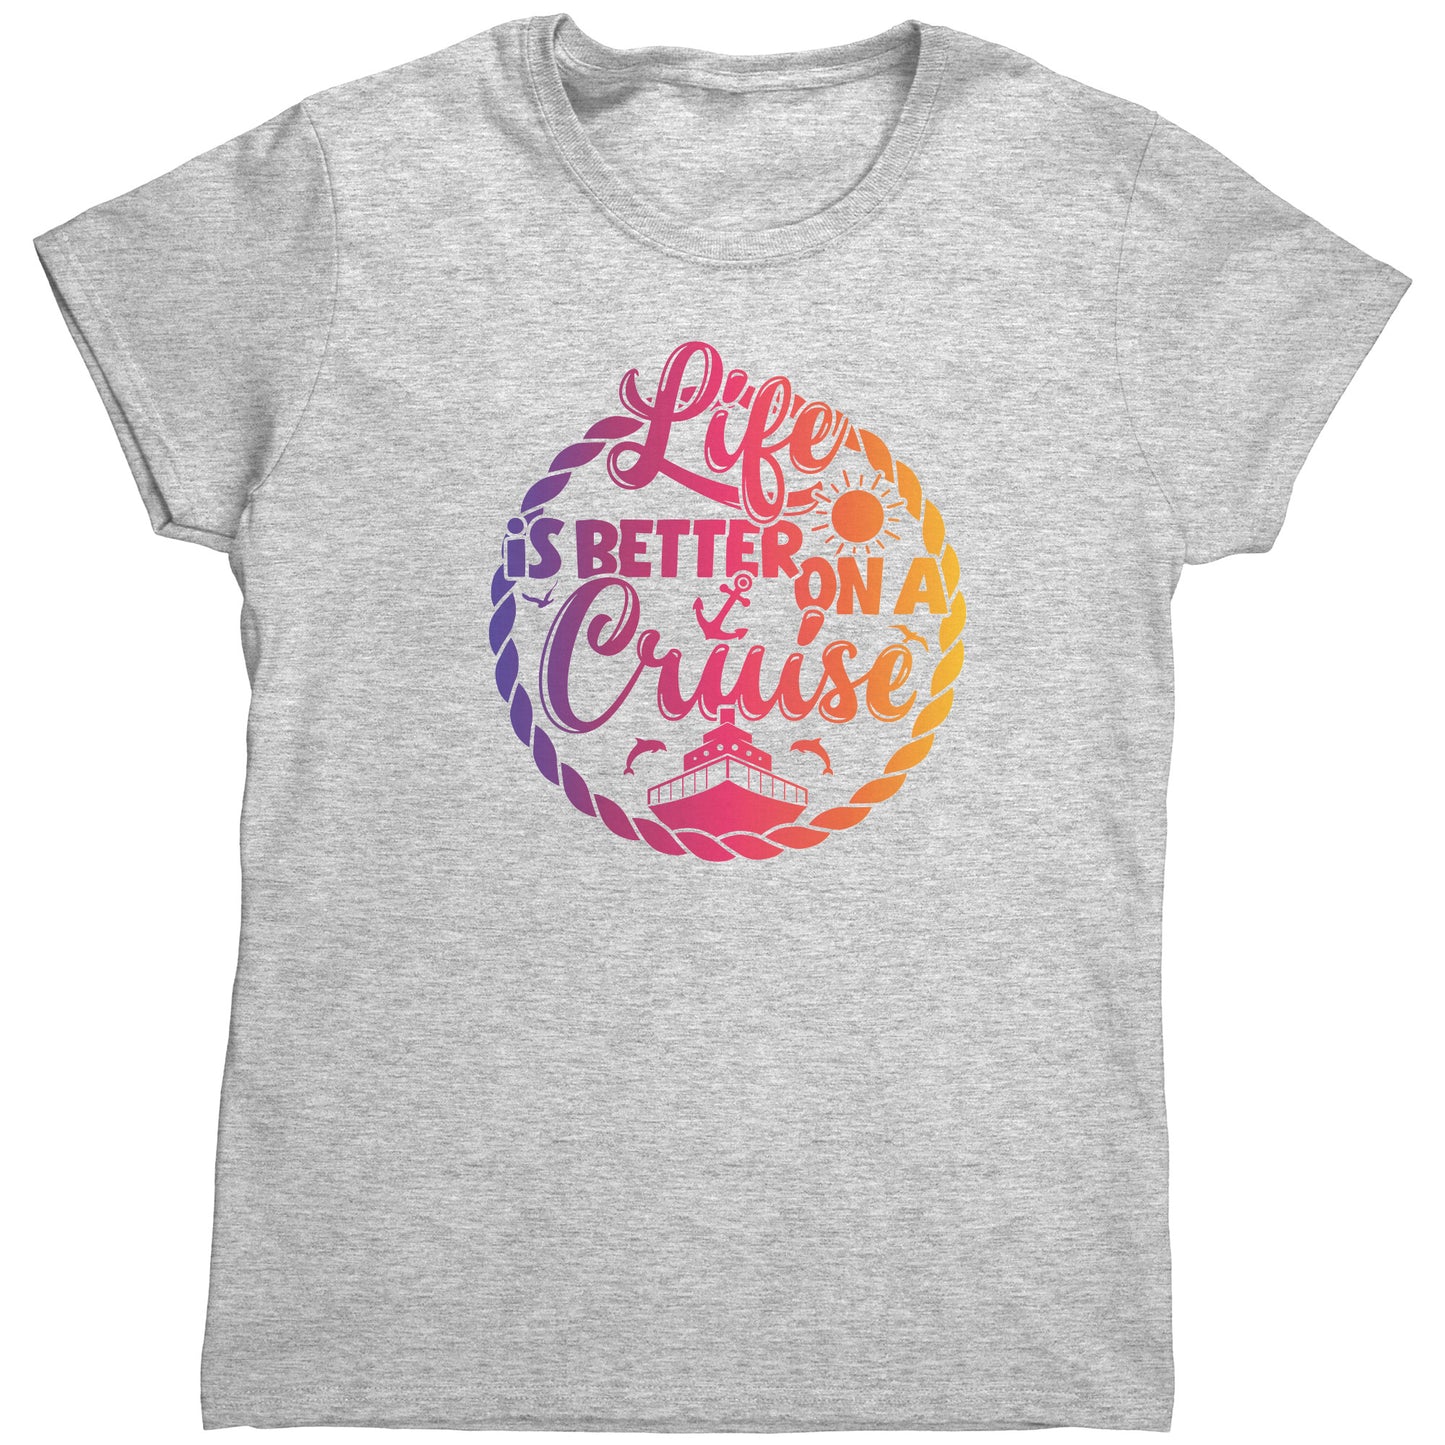 T Shirt Women's/Unisex/ Youth - Life is Better on a Cruise3